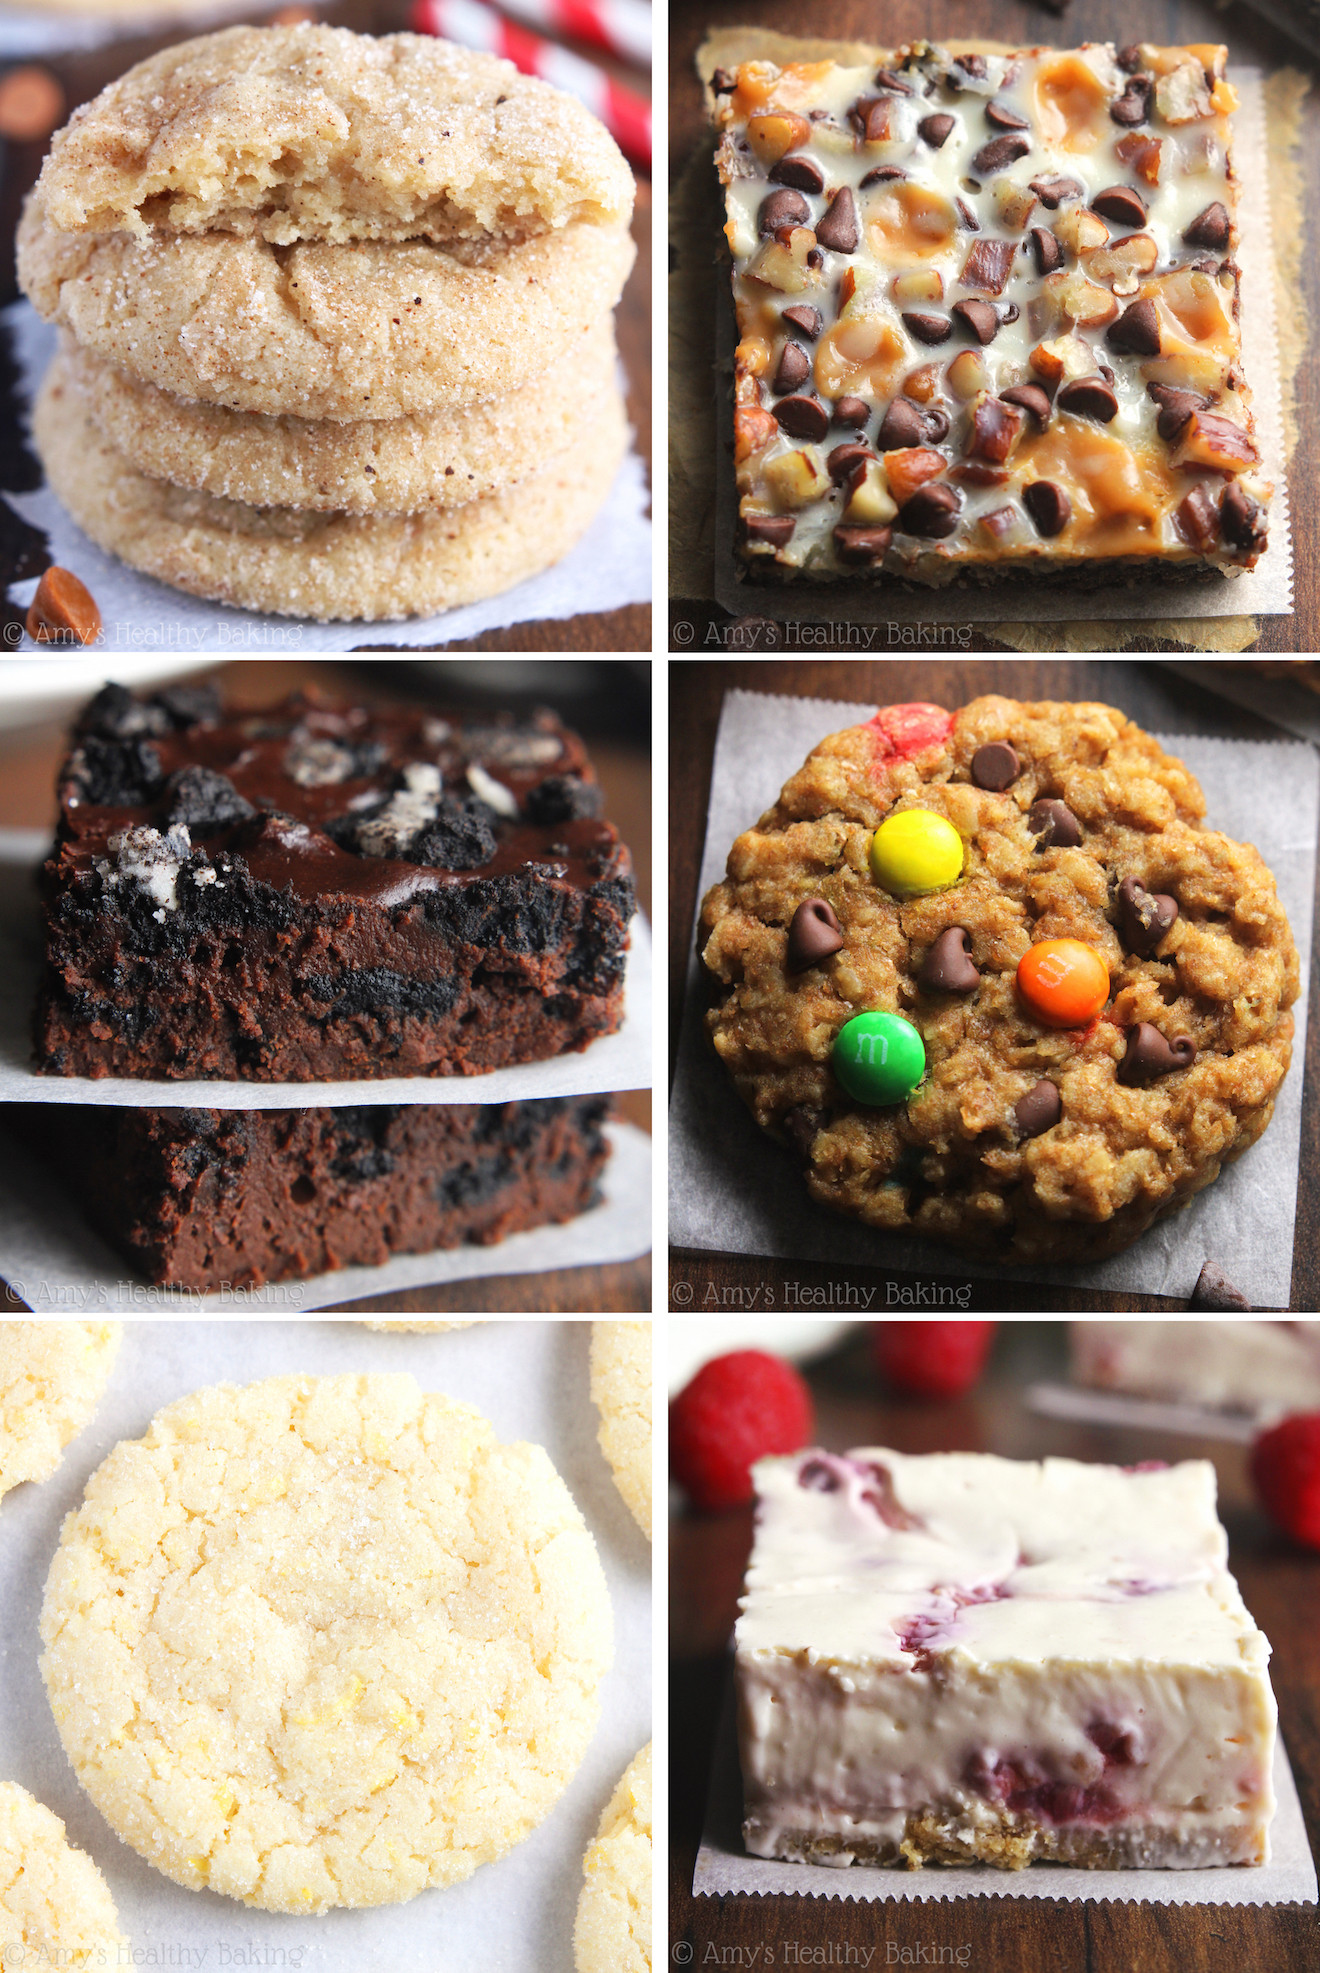 Best Healthy Desserts
 The 32 Best Healthy Desserts for Your New Year s